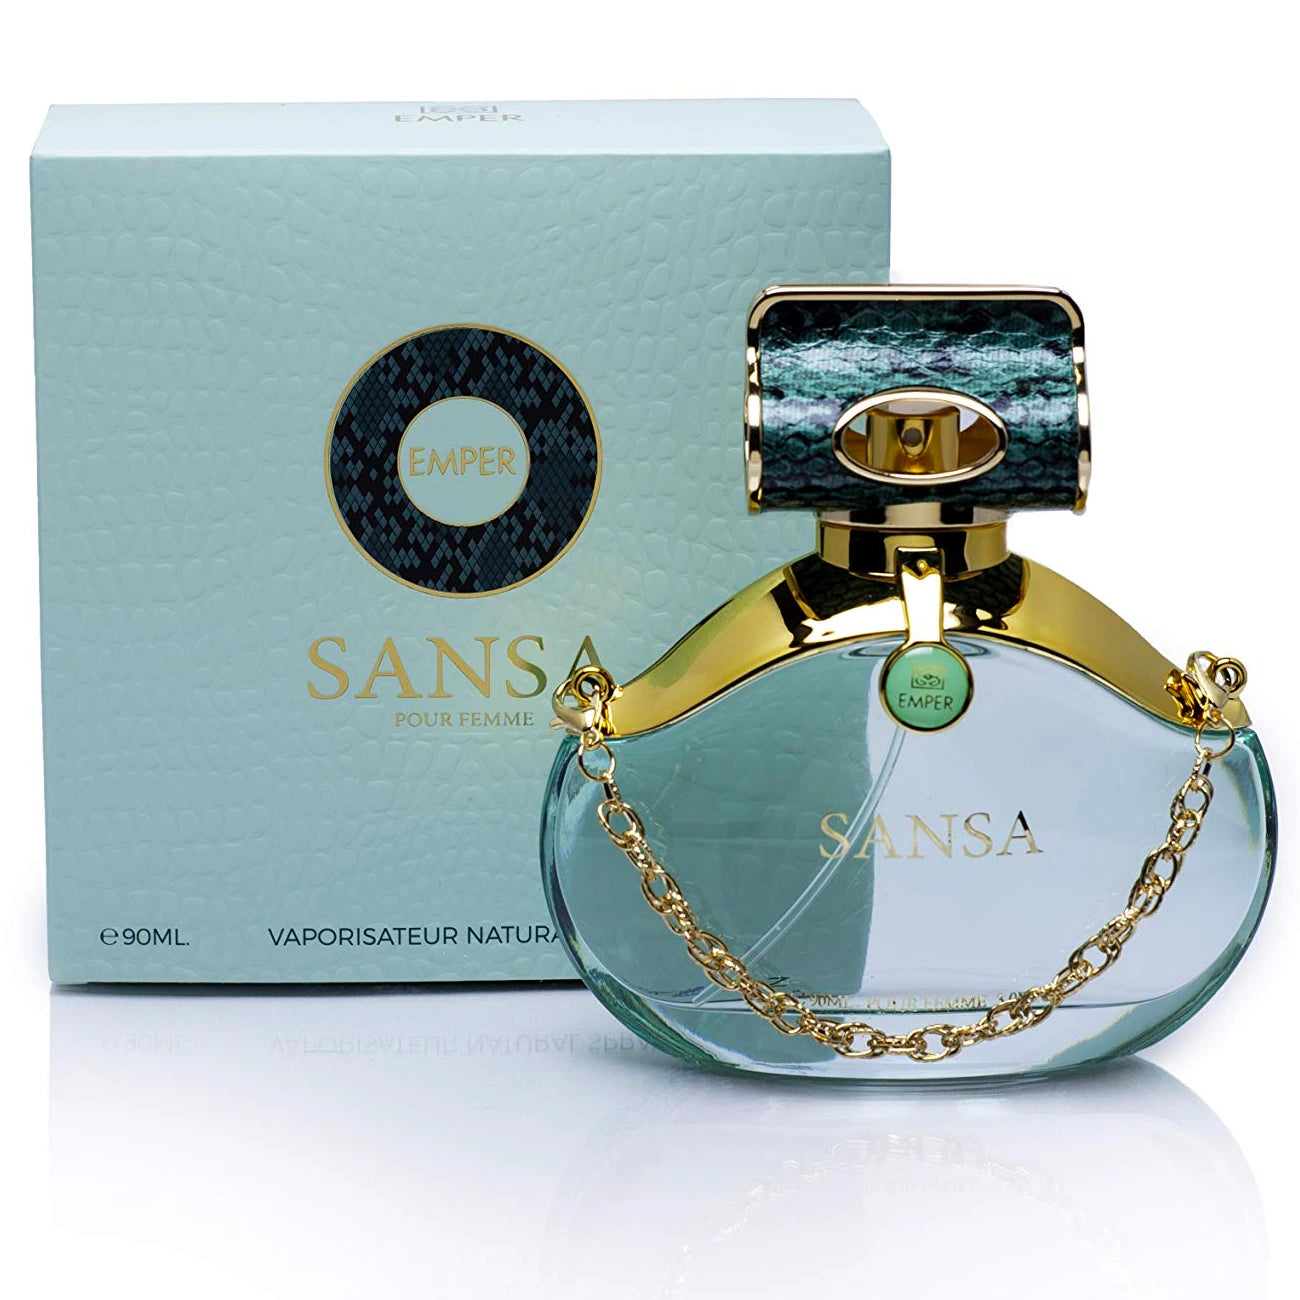 <p><em data-mce-fragment="1">INSPIRED BY</em><span data-mce-fragment="1"> <strong>M</strong><b>ARC JACOBS DECADENCE</b></span></p>
<p>Discover Sansa Emper, a lusciously luxurious scent featuring various floral and woody notes. The exotic top notes of pink rhubarb, peach, and raspberry sit atop soft orchids, violets, and a hint of marine notes. The warm base notes of sandalwood, musk, vanilla, and patchouli complete the enchanting scent. An aroma sure to captivate your senses and turn heads.</p>